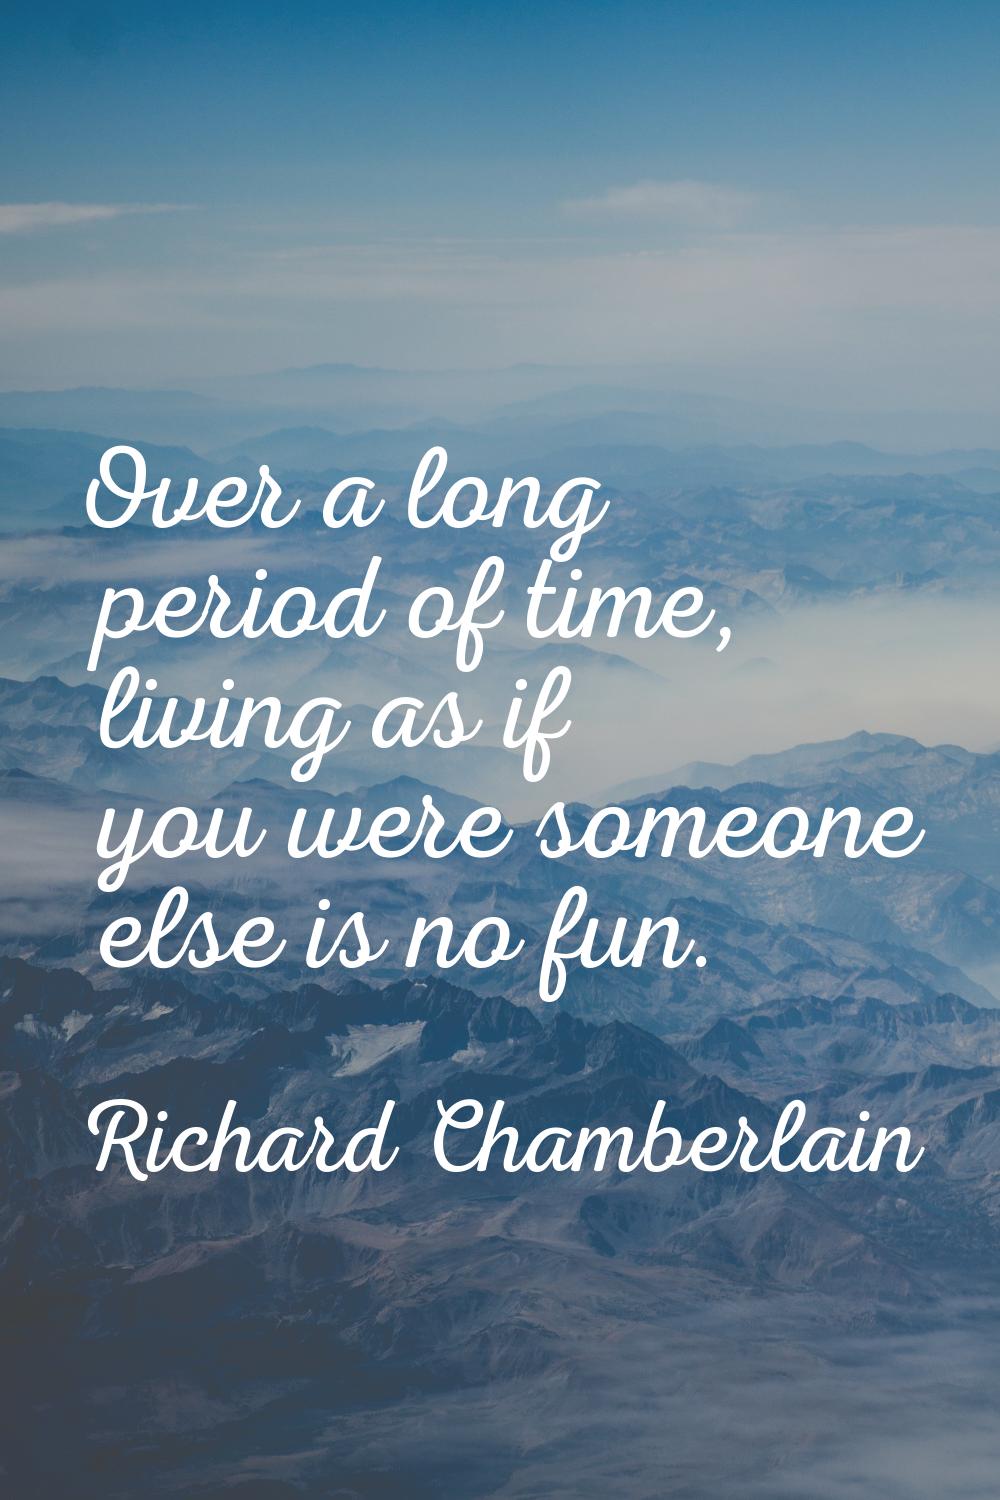 Over a long period of time, living as if you were someone else is no fun.